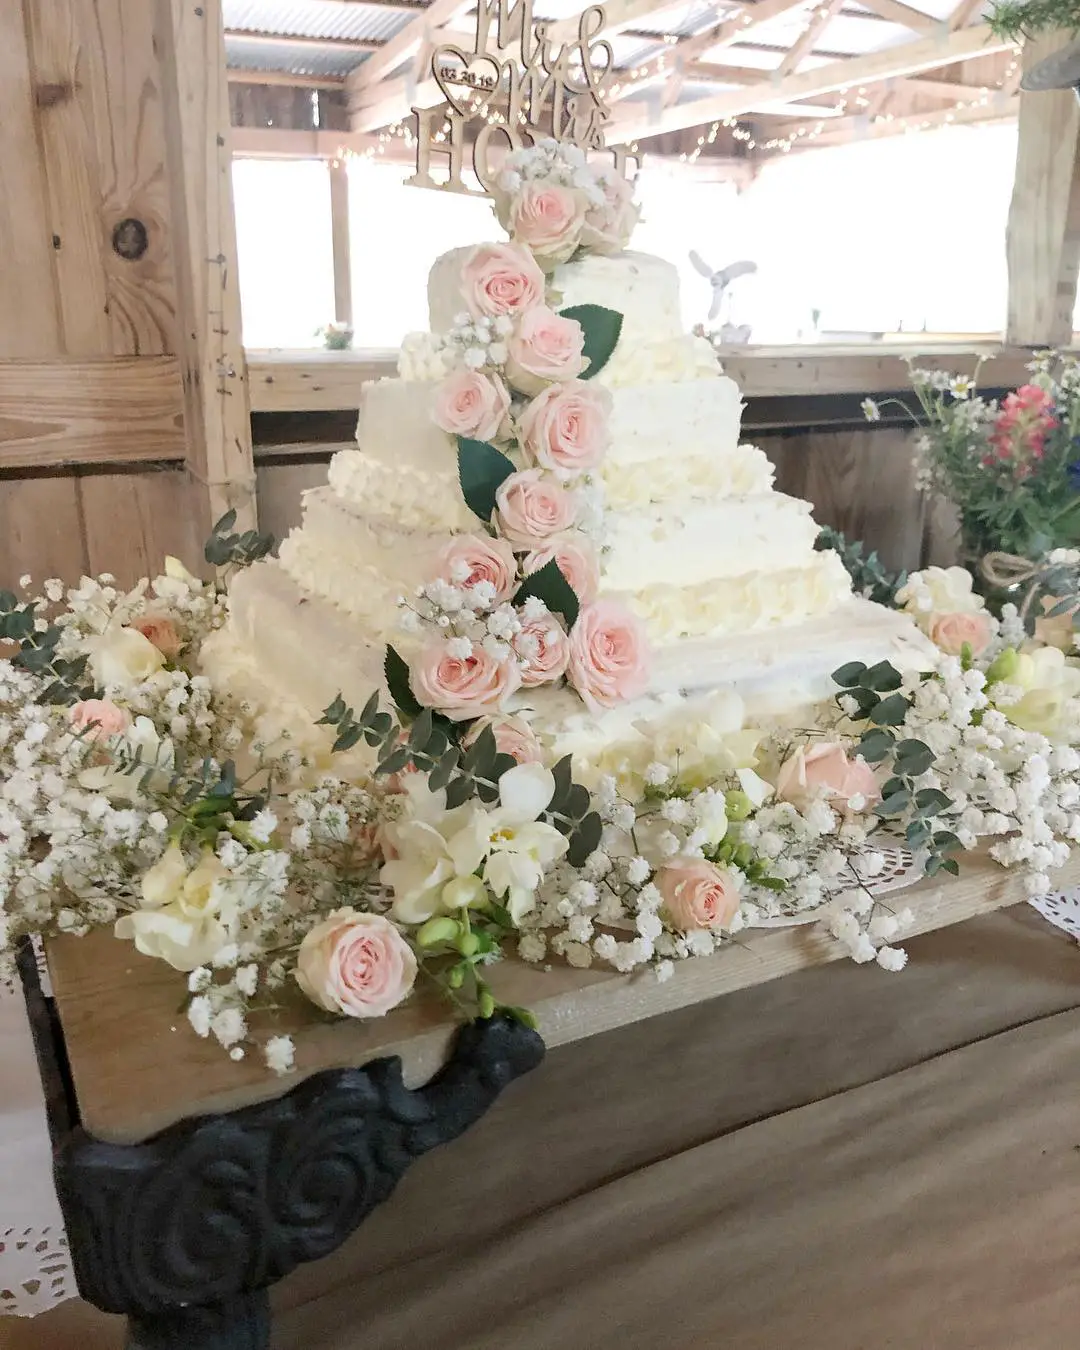 Thrifty couple makes gorgeous wedding cake from Costco ...